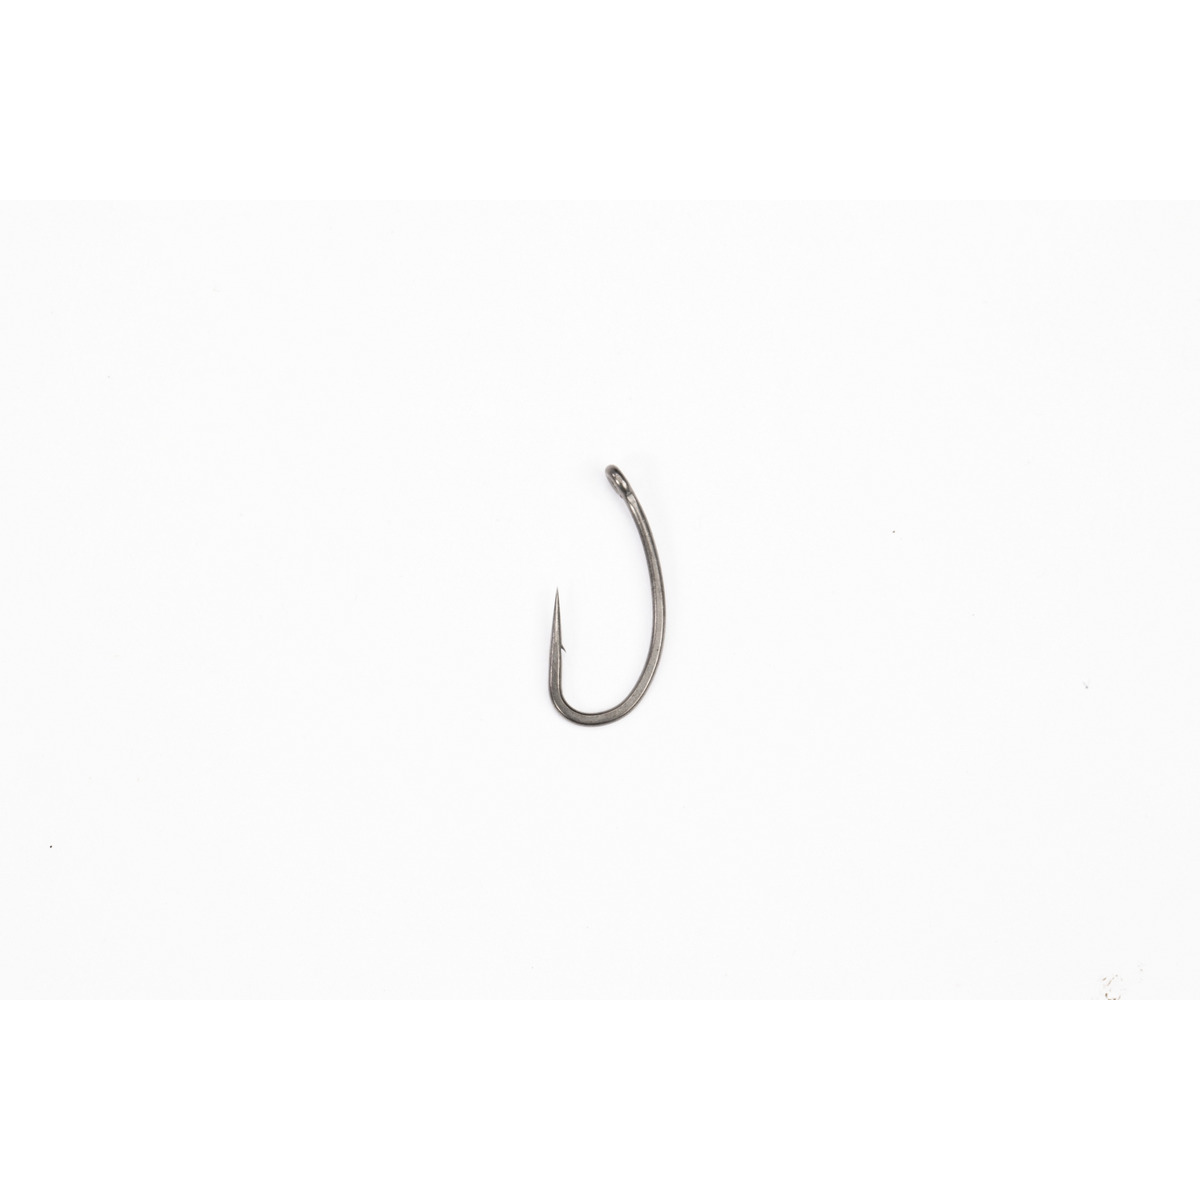 Nash Fang X - Size 10 Micro Barbed